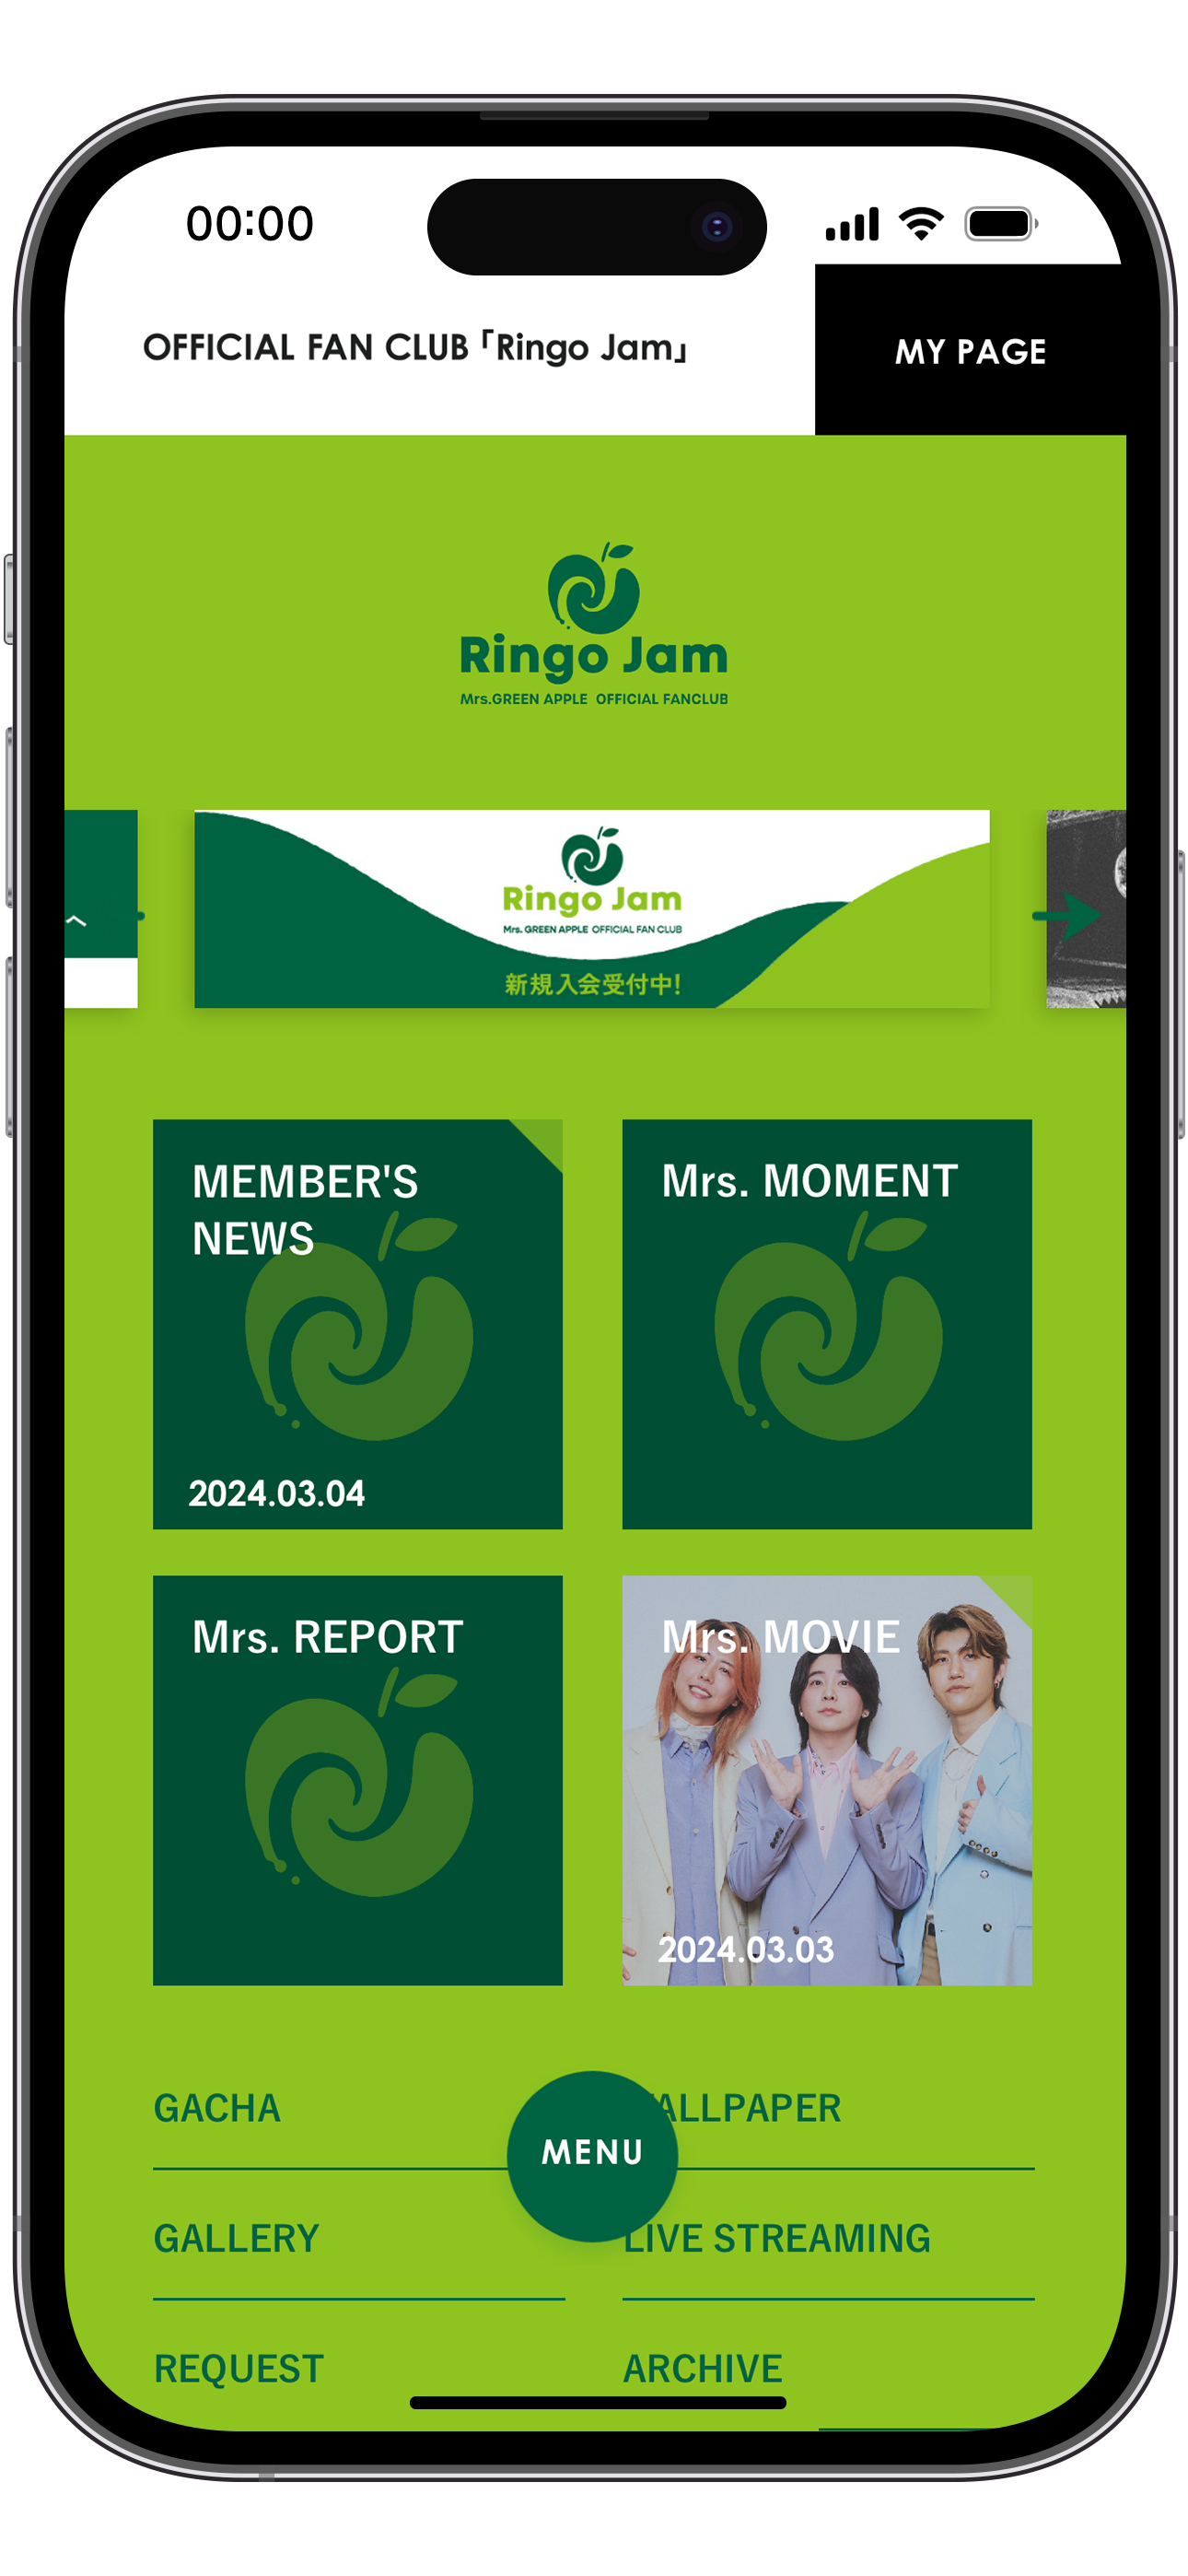 OFFICIAL APP - Mrs. GREEN APPLE OFFICIAL SITE｜OFFICIAL FAN CLUB 